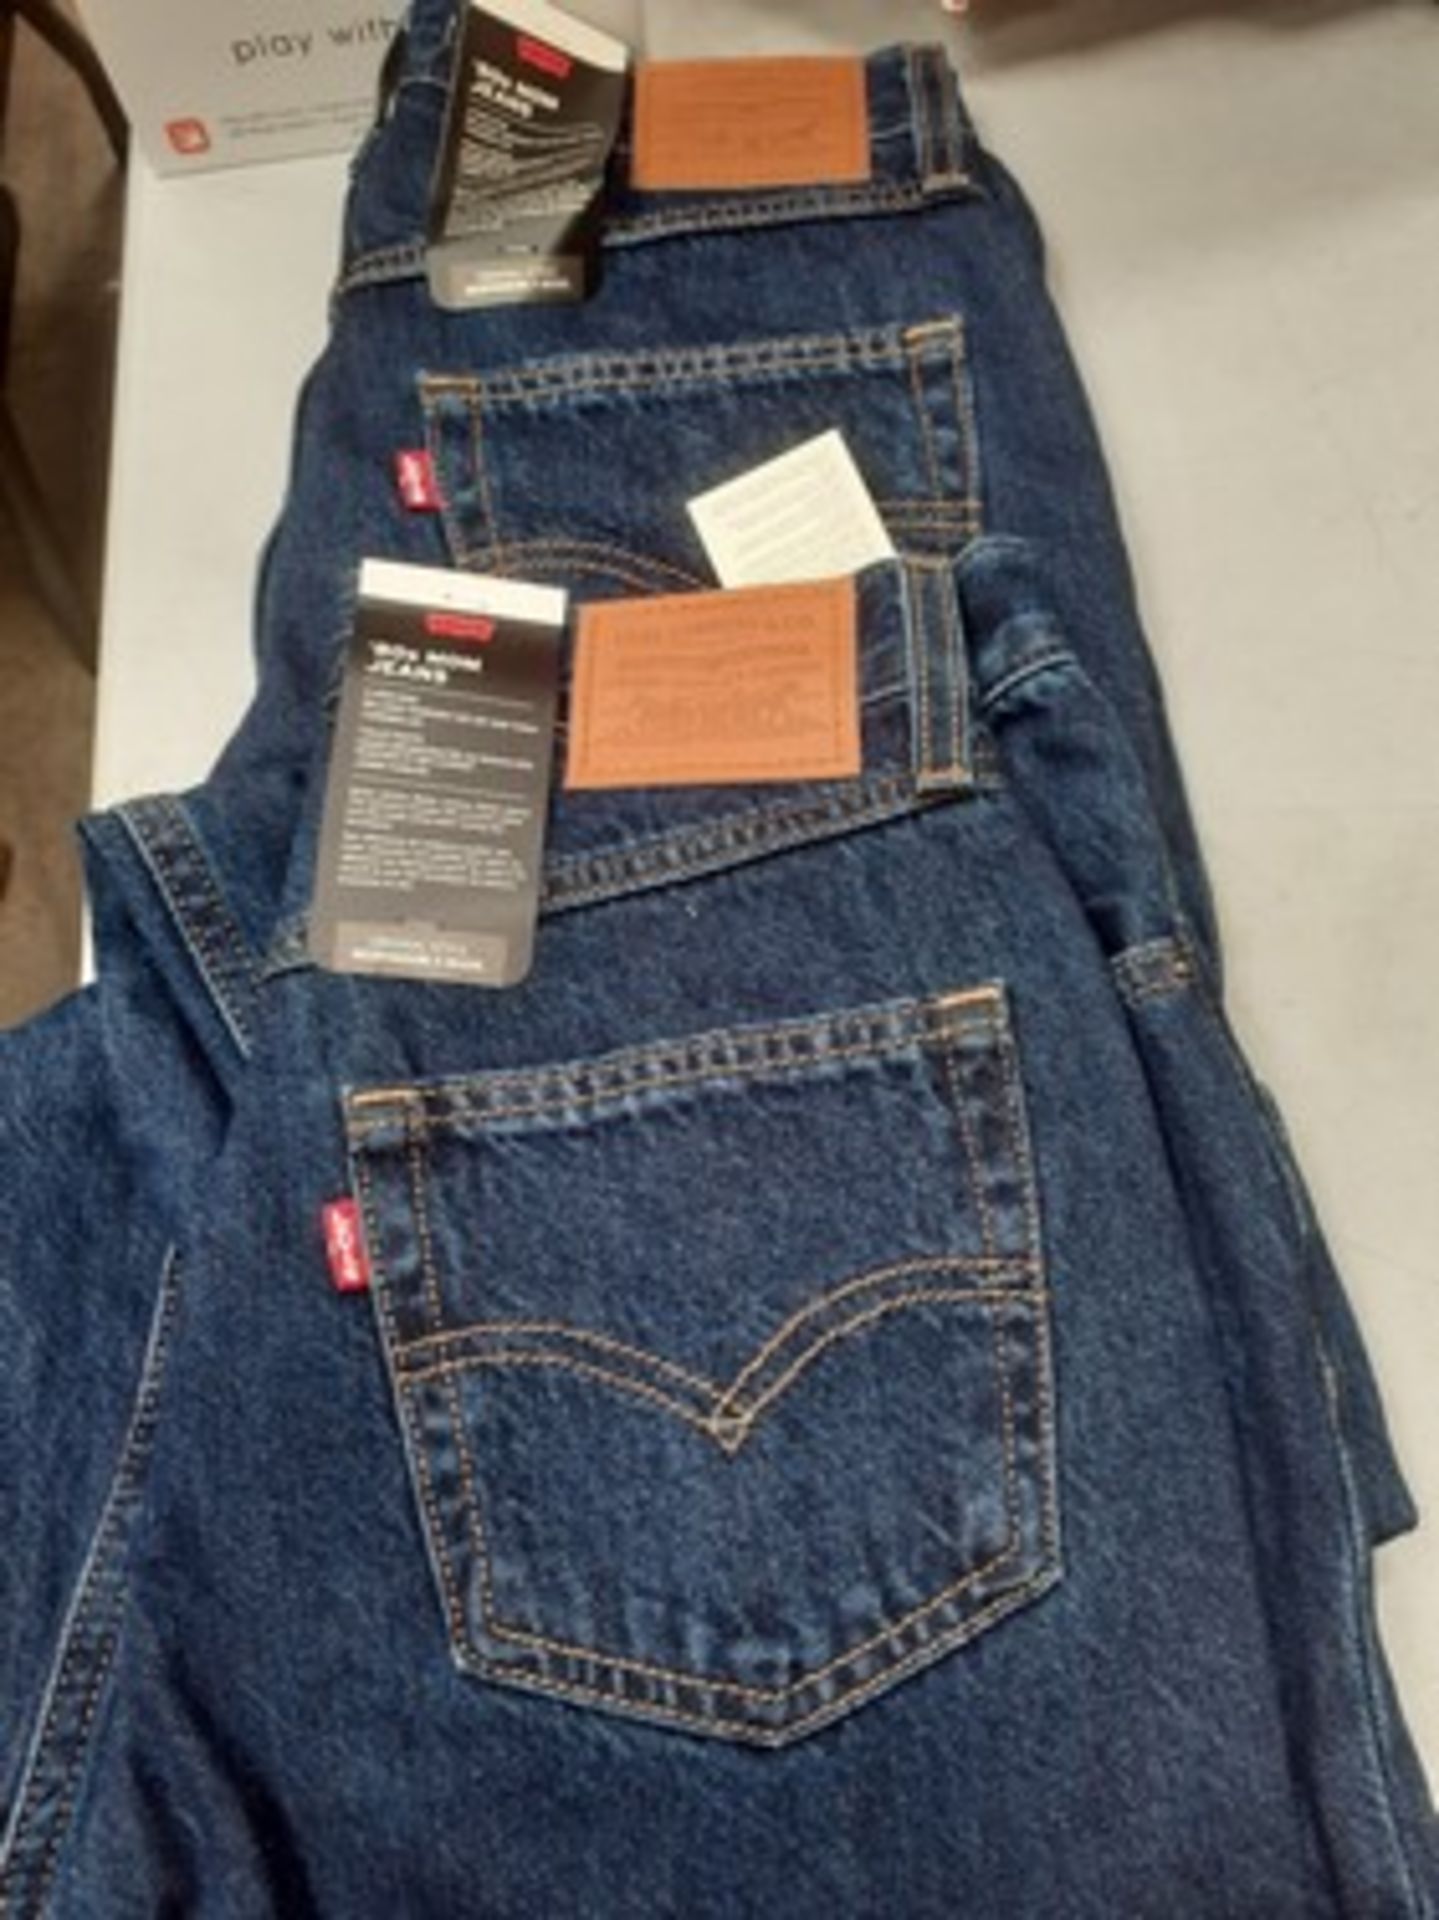 2 x pairs of Levis 80's Mom jeans, sizes 26 x 30 and 27 x 30 - new with tags (E8B)